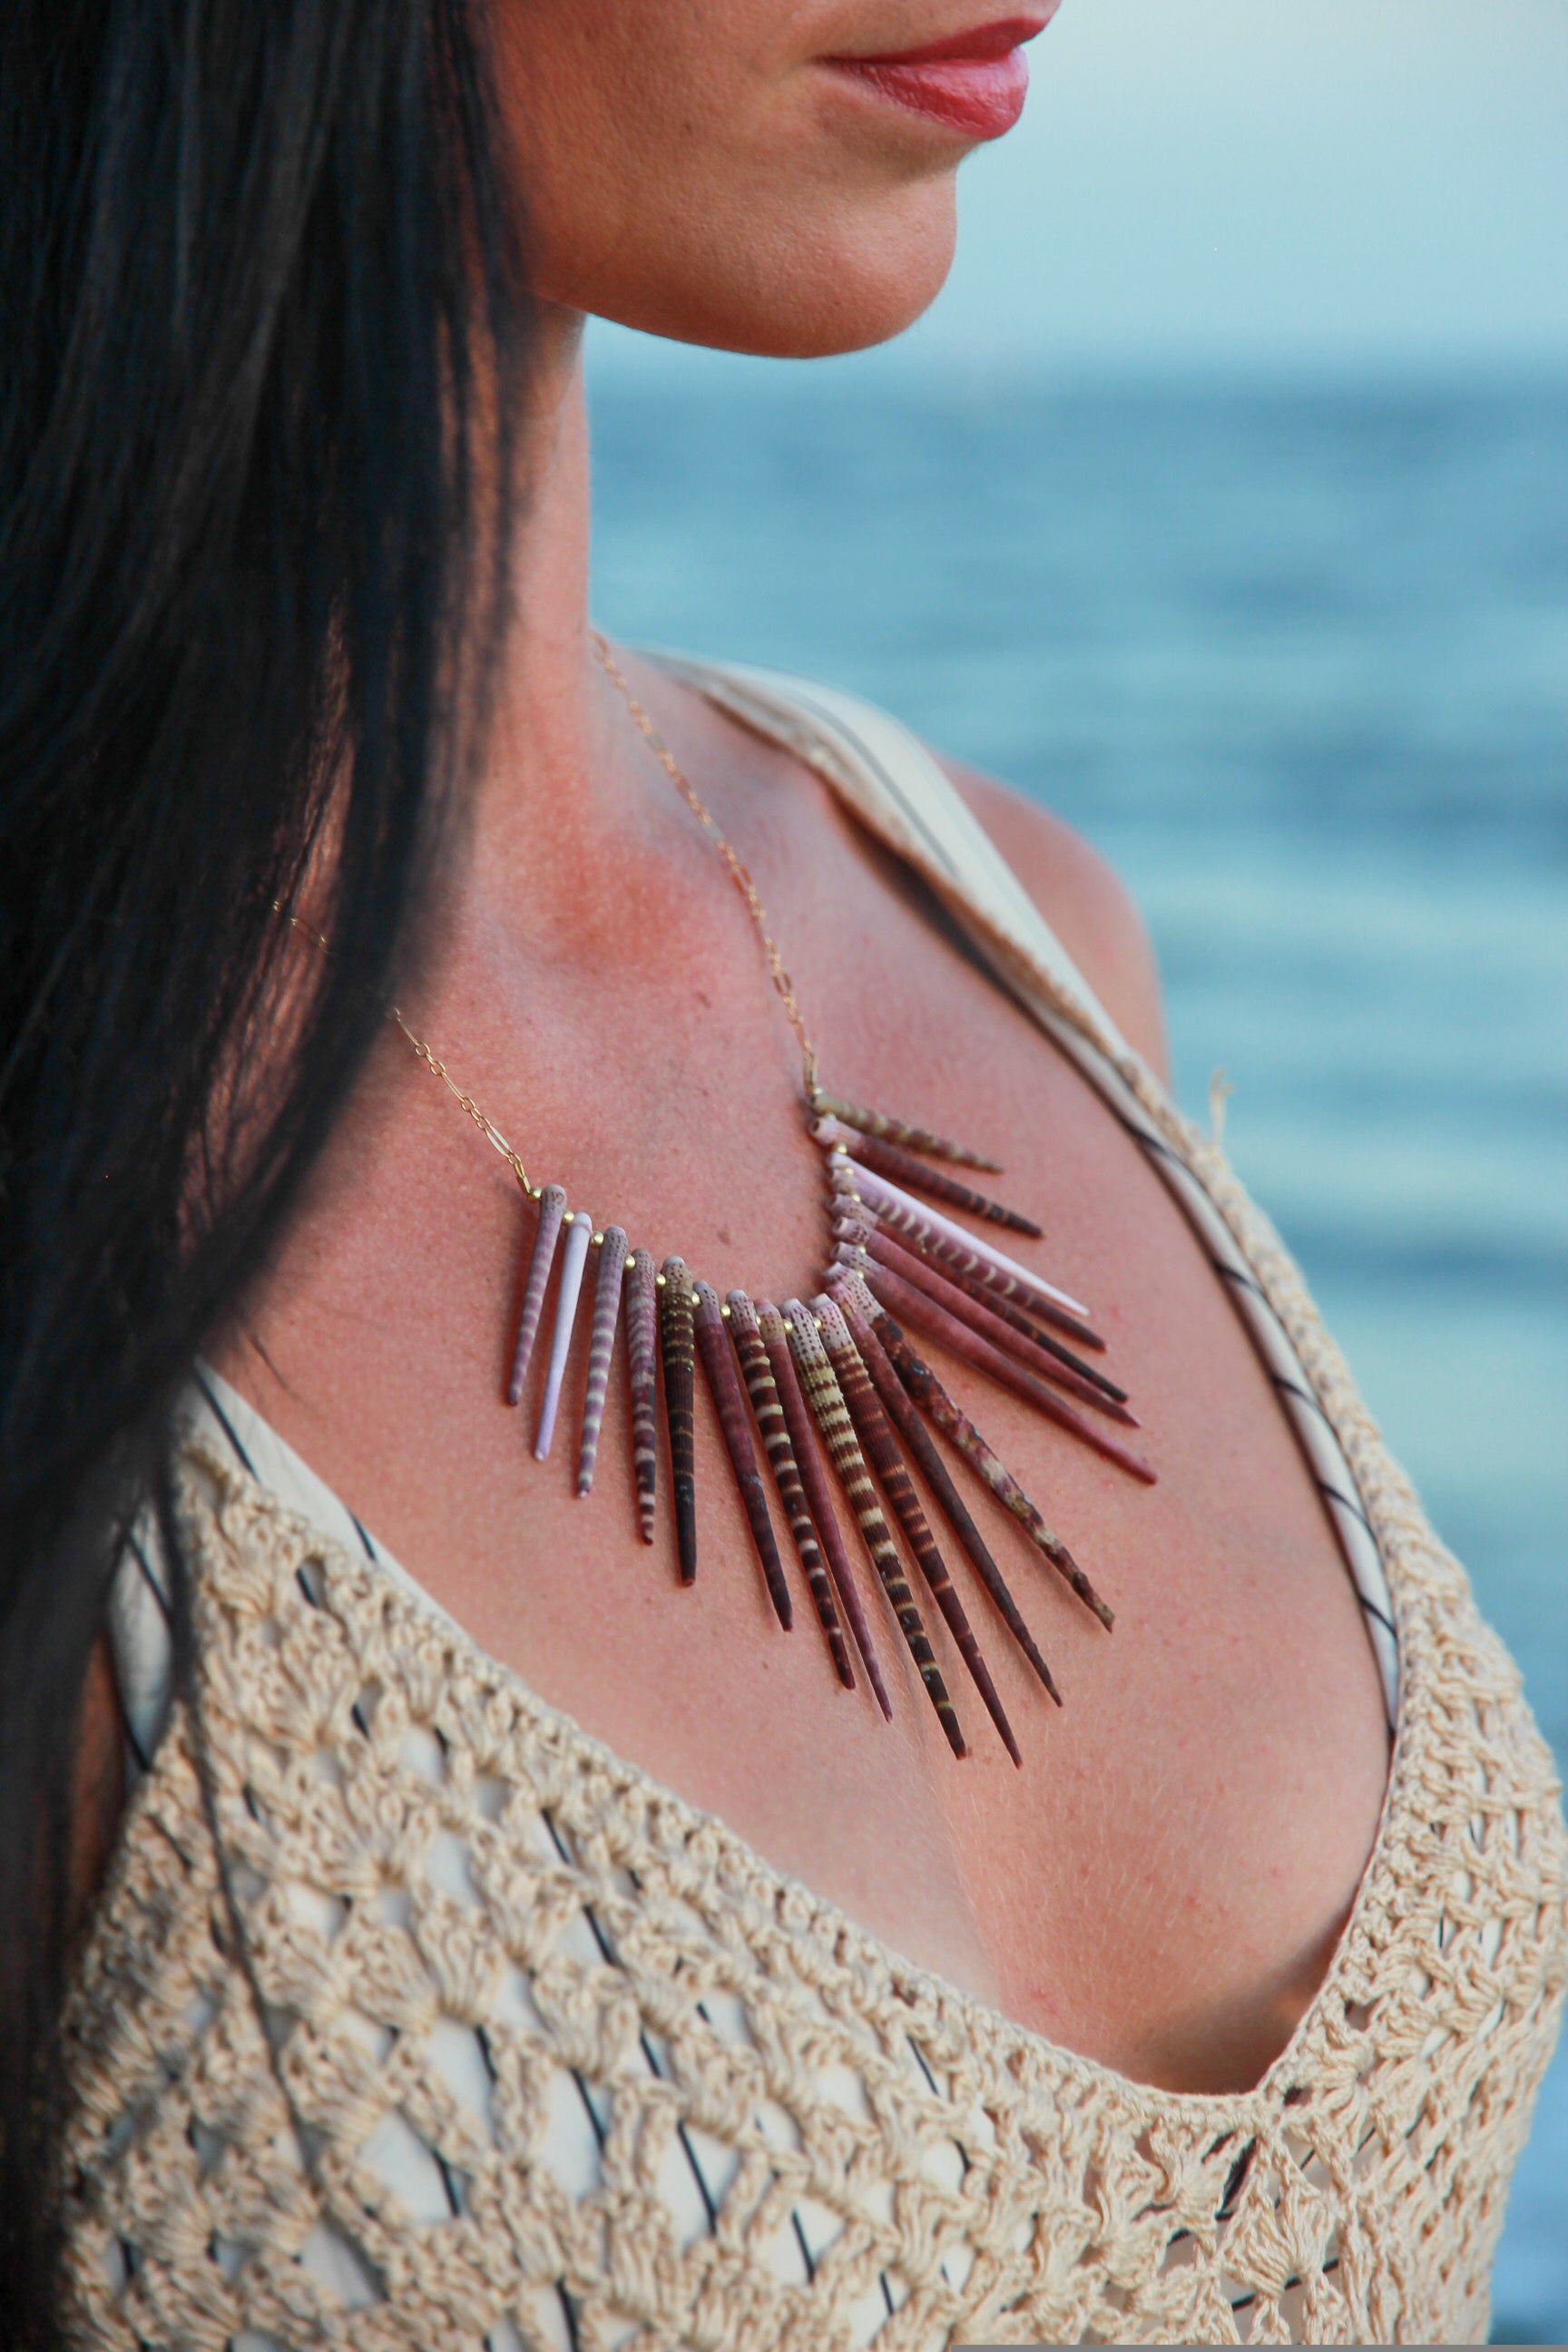 Sea urchin spine necklace shown on a woman's neck. 